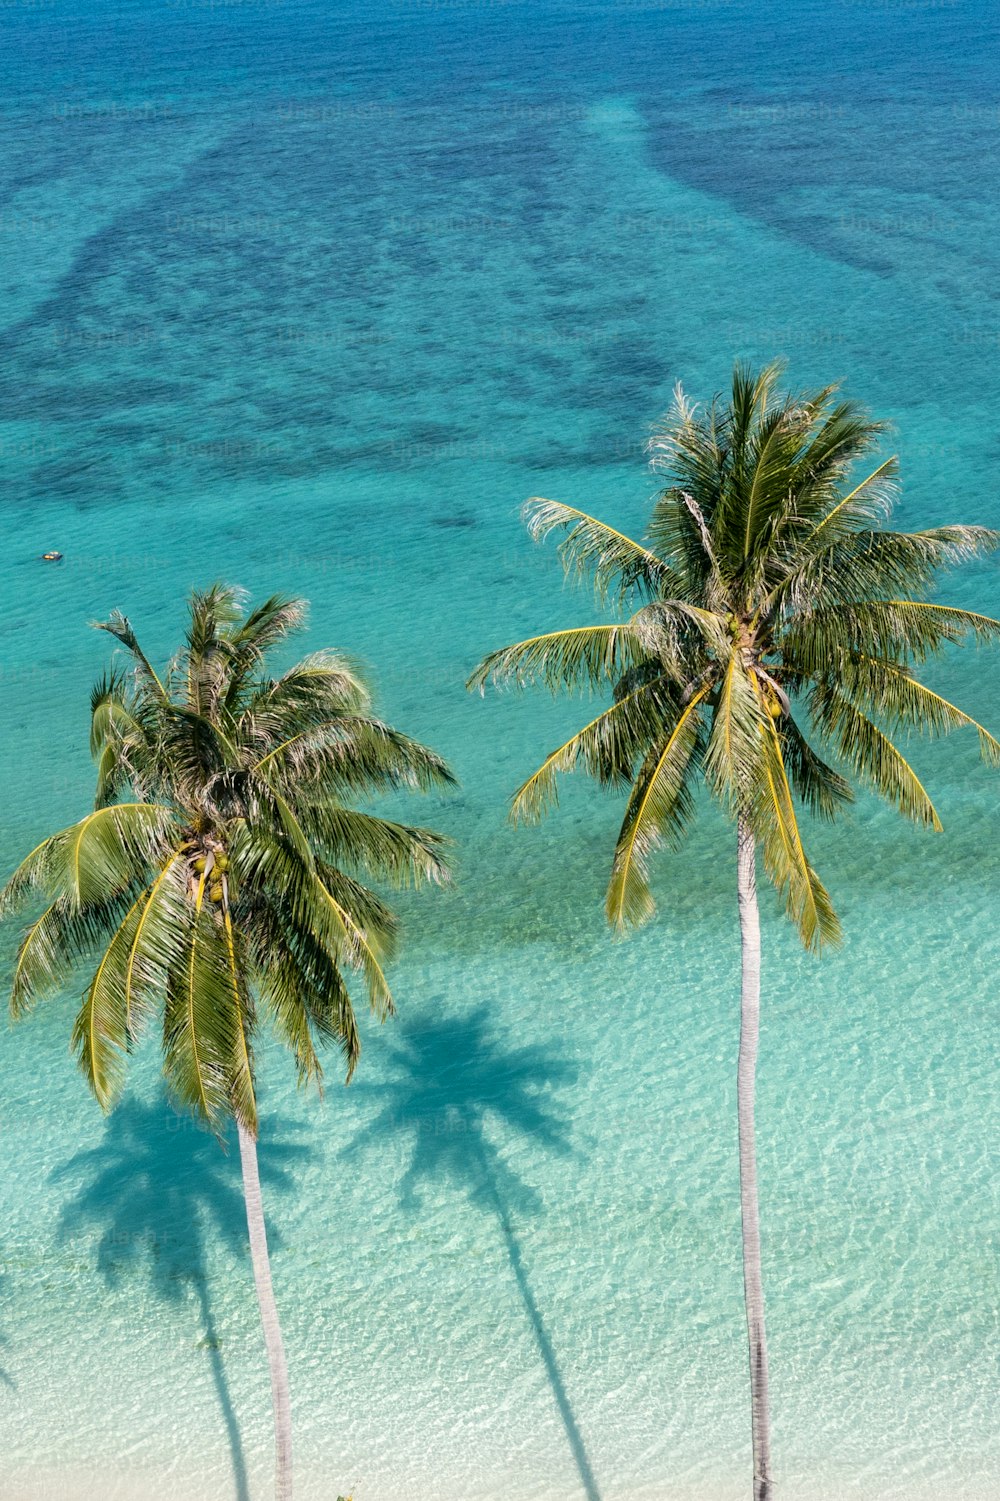 two palm trees on a beach with clear blue water